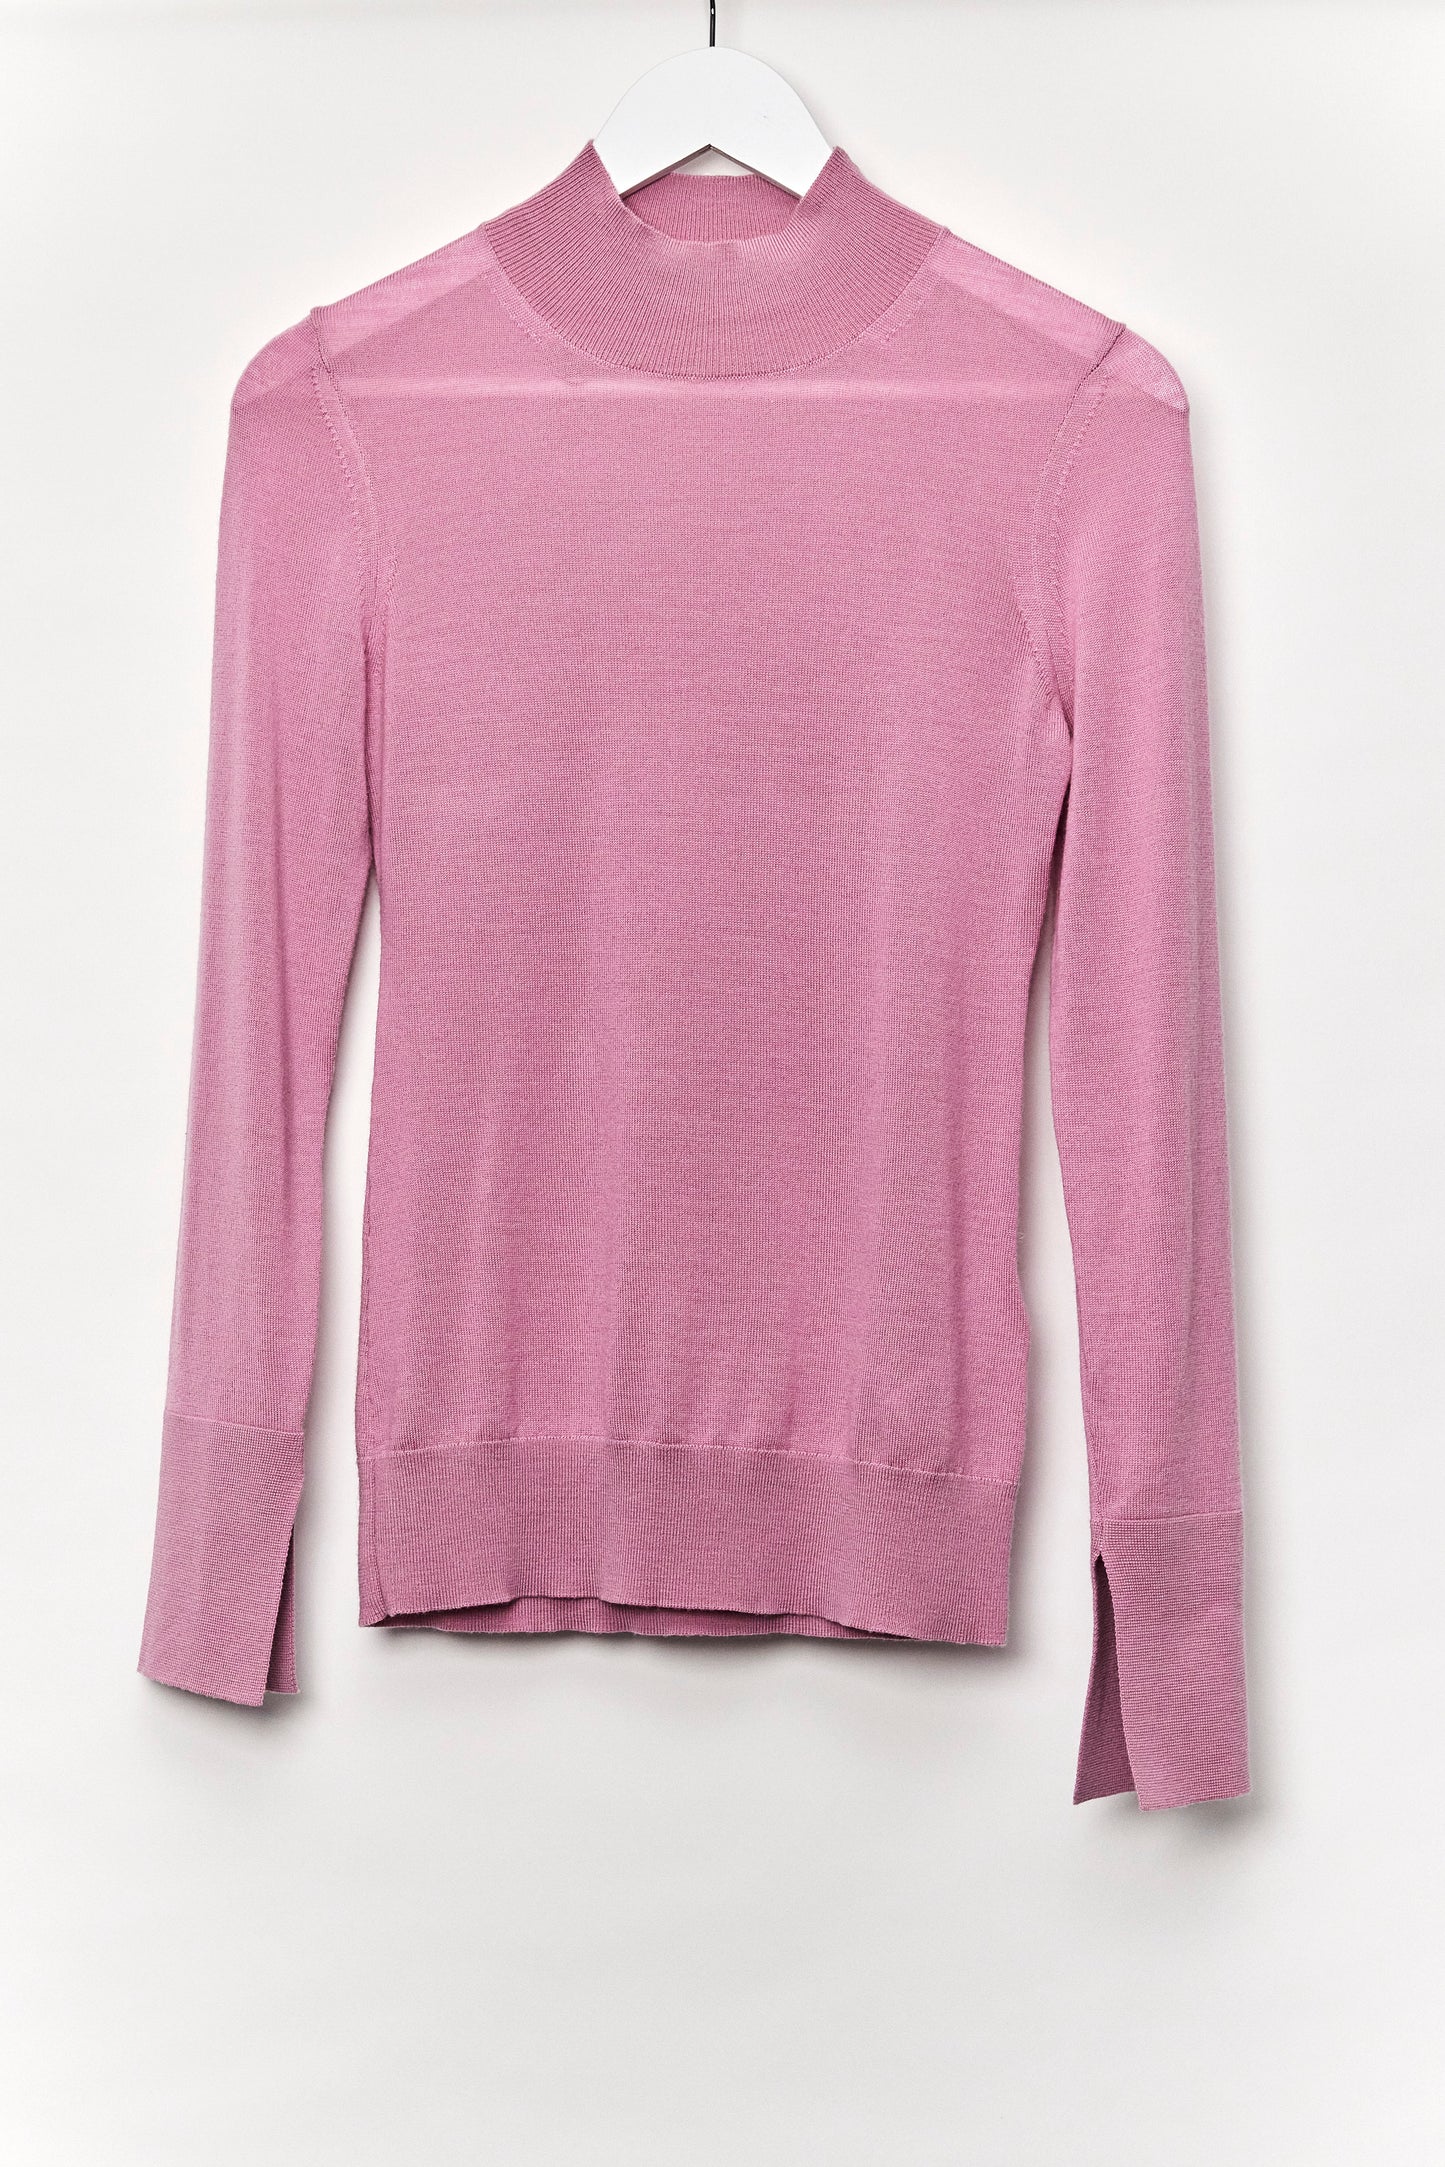 Womens Reiss Pink Turtleneck sweater Size Extra Small